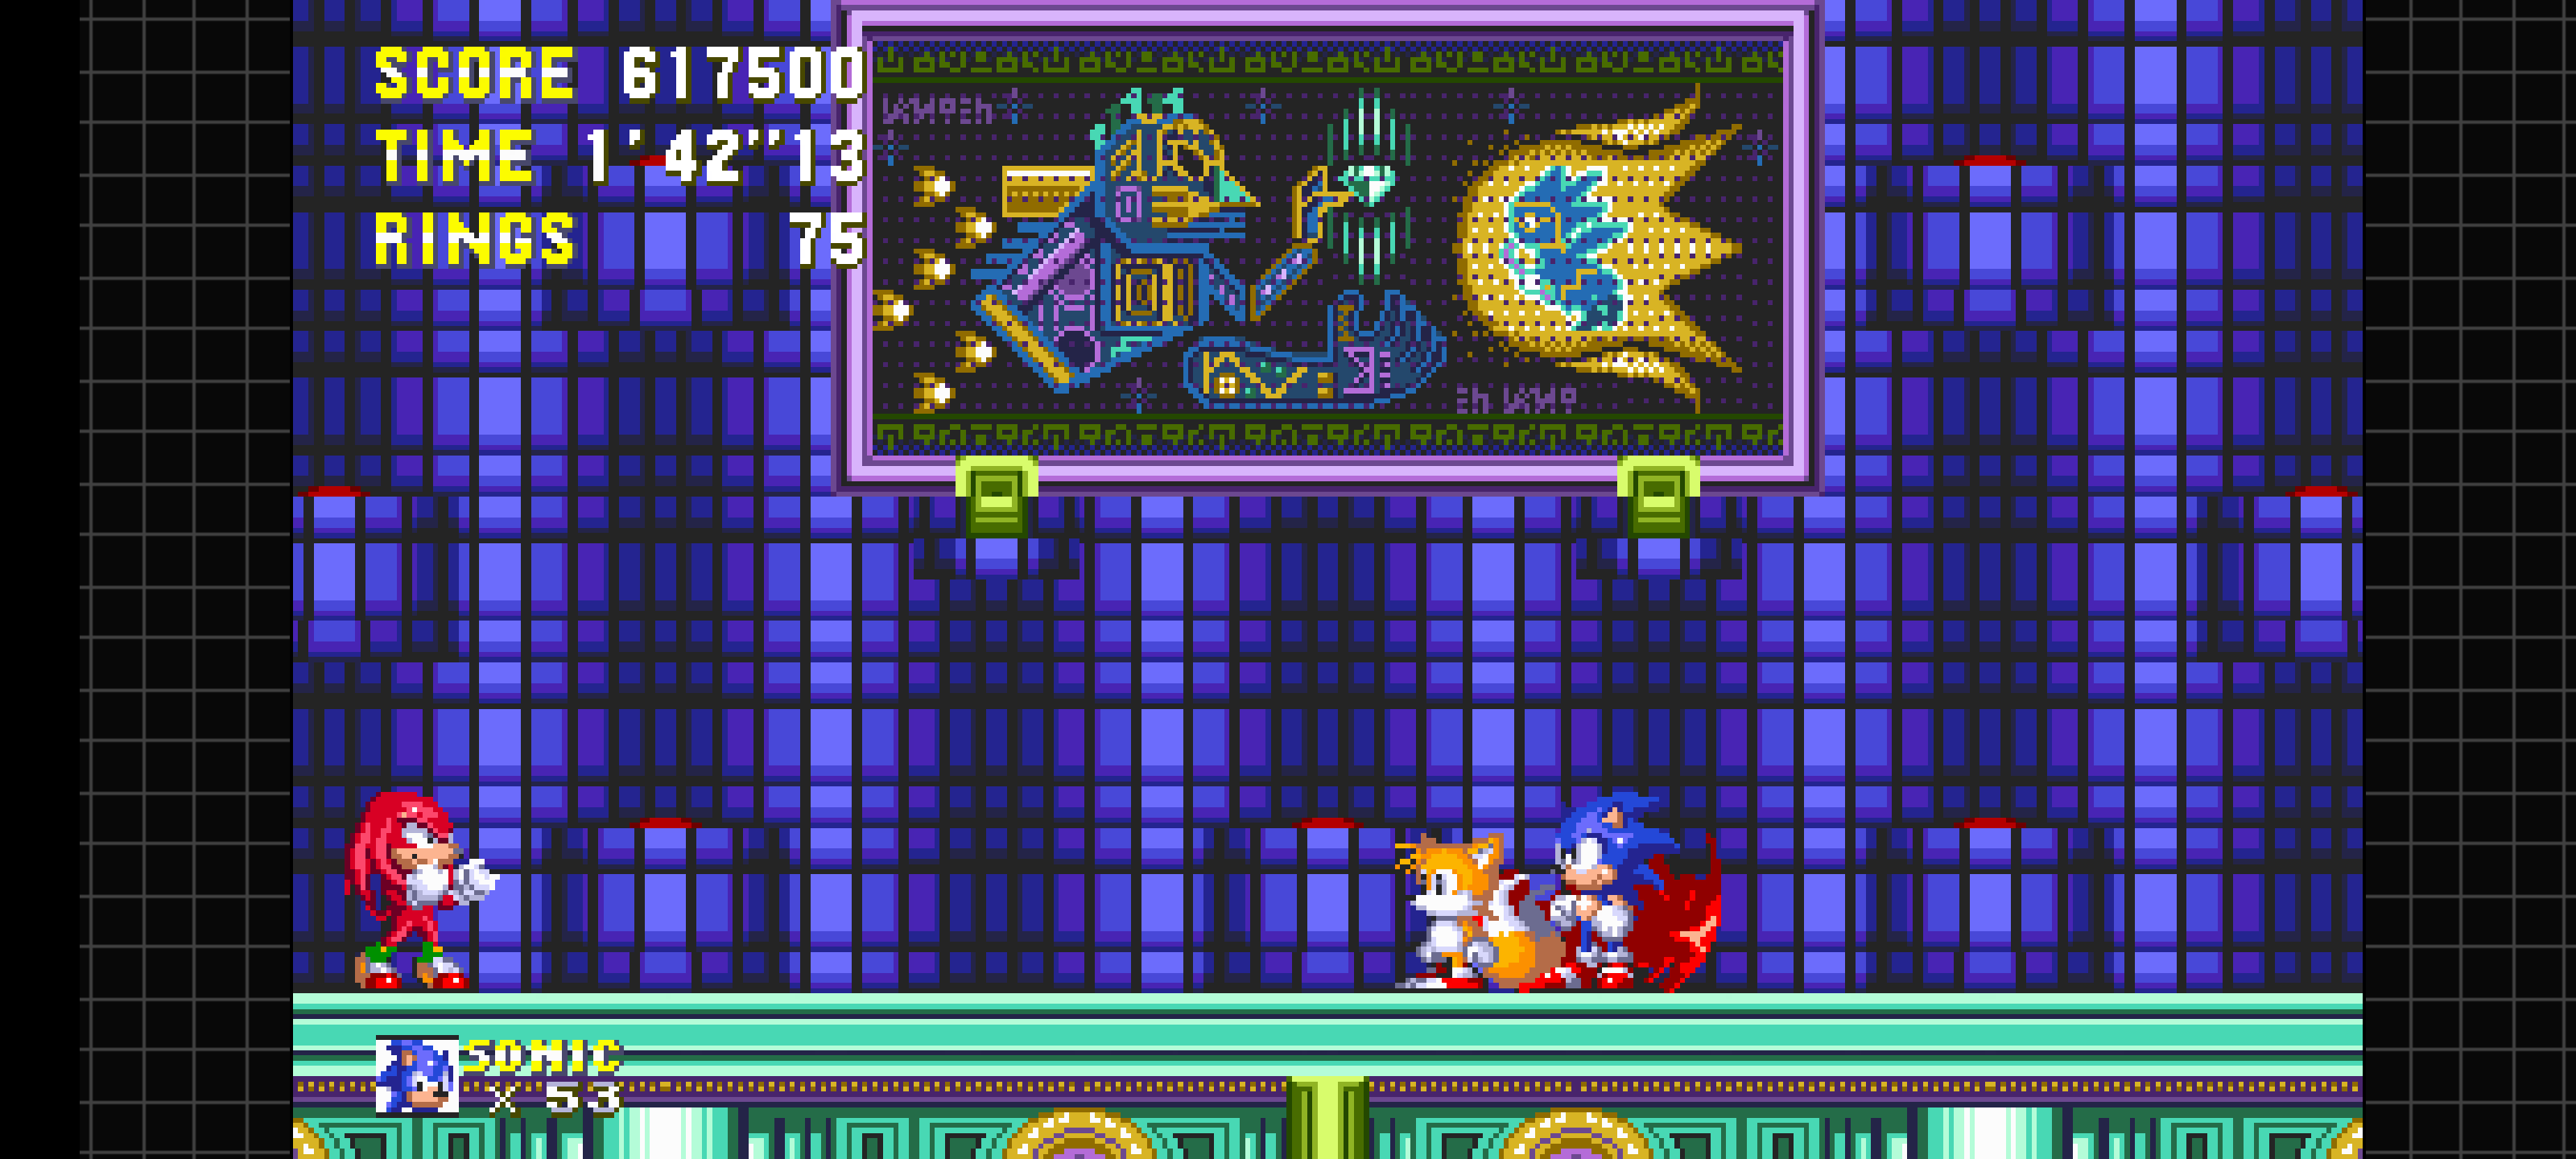 Sonic 3 air knuckles. Sonic 3 complete. Sonic 3 Air. Sonic 3 and Knuckles. Sonic 3 a.i.r.